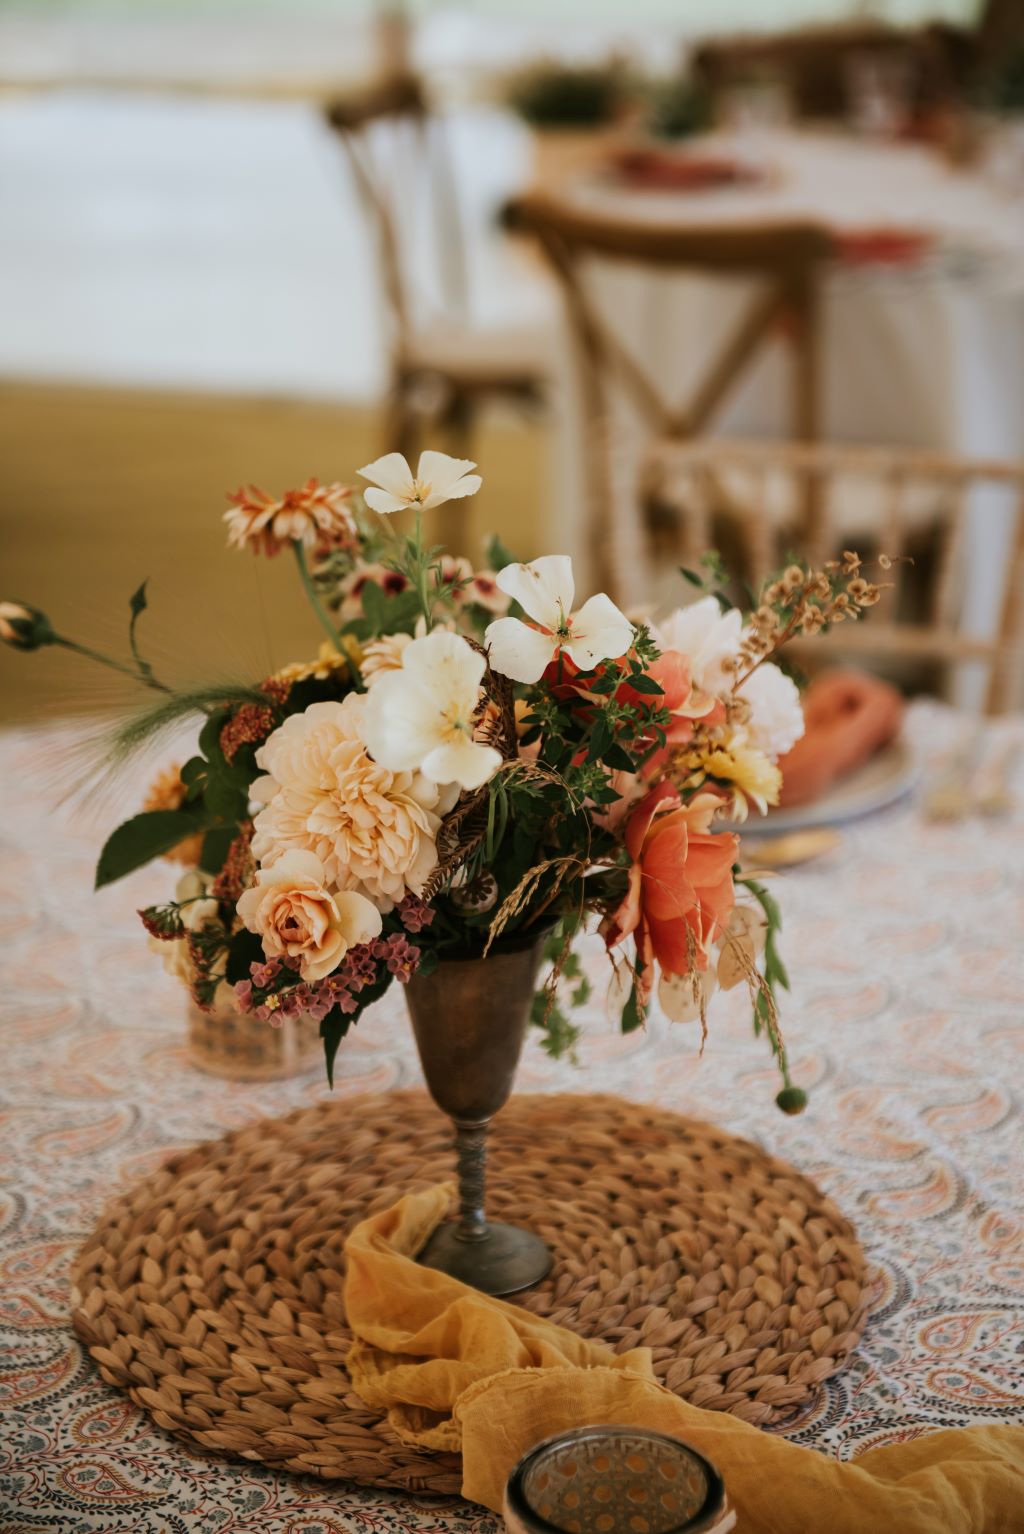 Moroccan styled wedding inspiration by Martina Paul at Wonderful Events on English Wedding